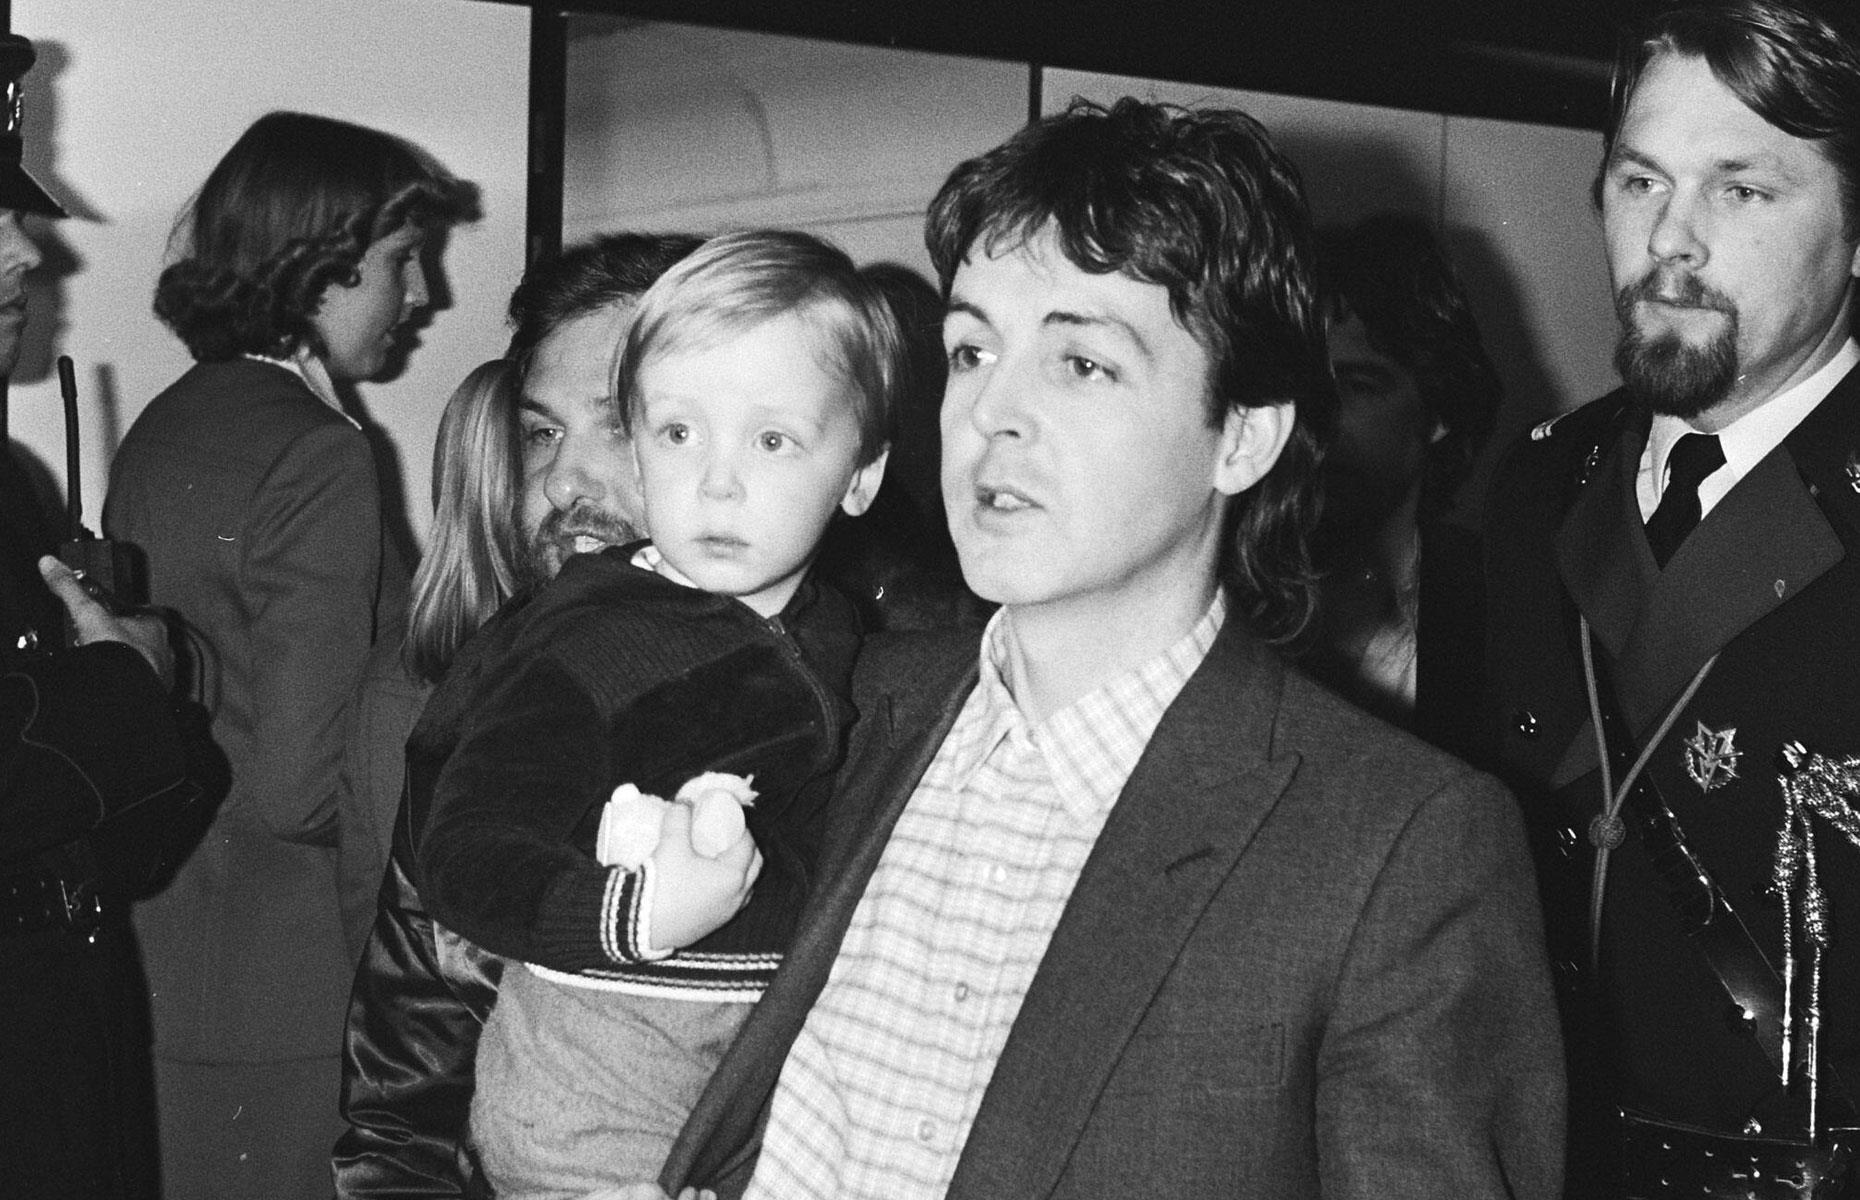 <p>The youngest of Sir Paul McCartney's four children with Linda Eastman, James McCartney was born in 1977.</p>  <p>Like his father, James has pursued a career in music, though he didn't release his first studio album <em>Me</em> until 2013.</p>  <p>By that point, he'd also collaborated with his parents and put out two EPs. At one point, the Beatles kid appeared to be flirting with the idea of forming a band with Zak Starkey, Sean Lennon, and Dhani Harrison, although that didn't come to fruition.</p>